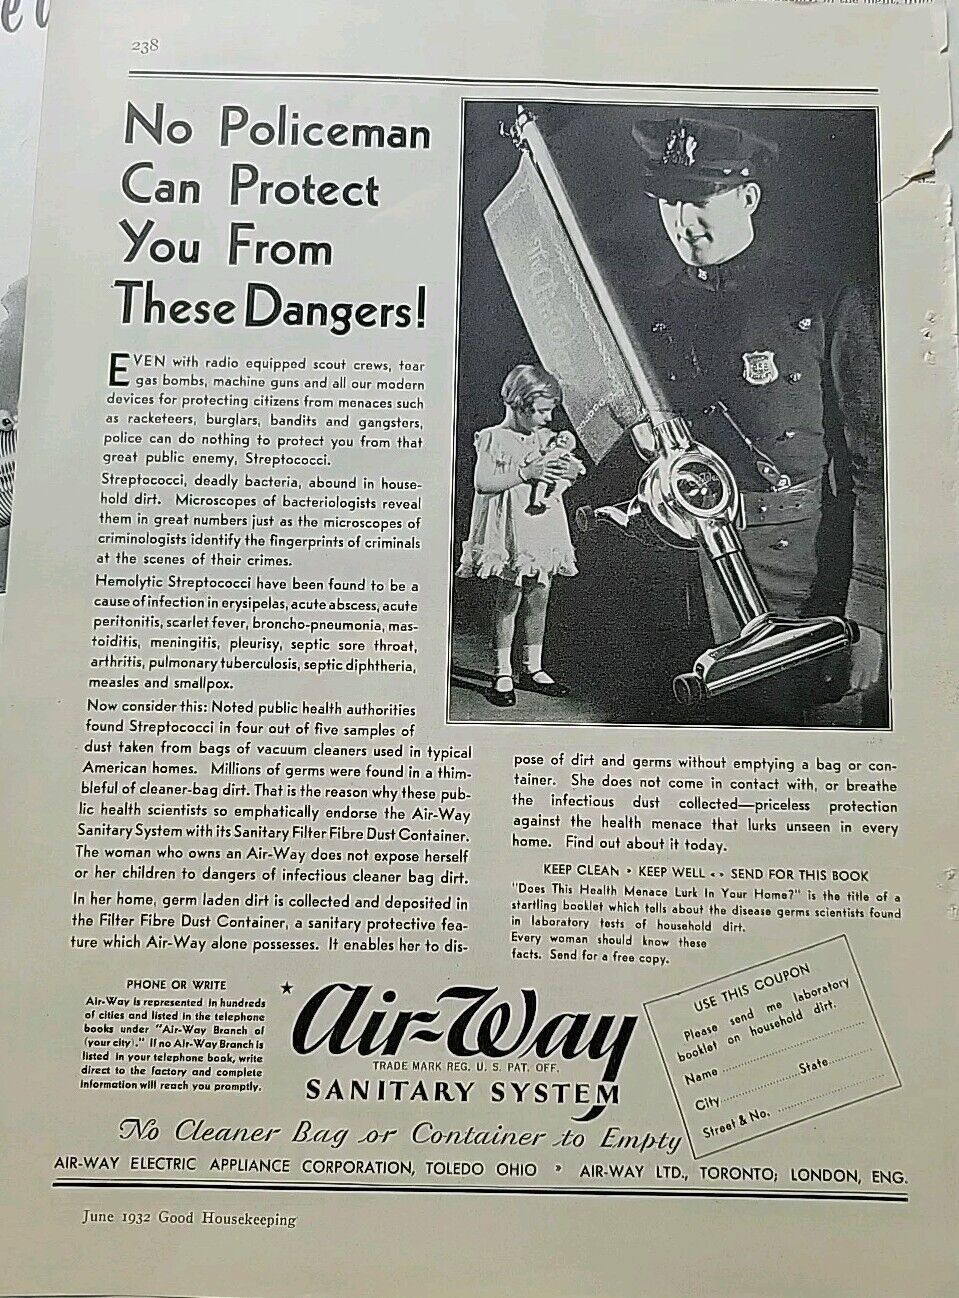 1932 Air-way Sanitary system vacuum cleaner.No policeman can protect Vintage ad